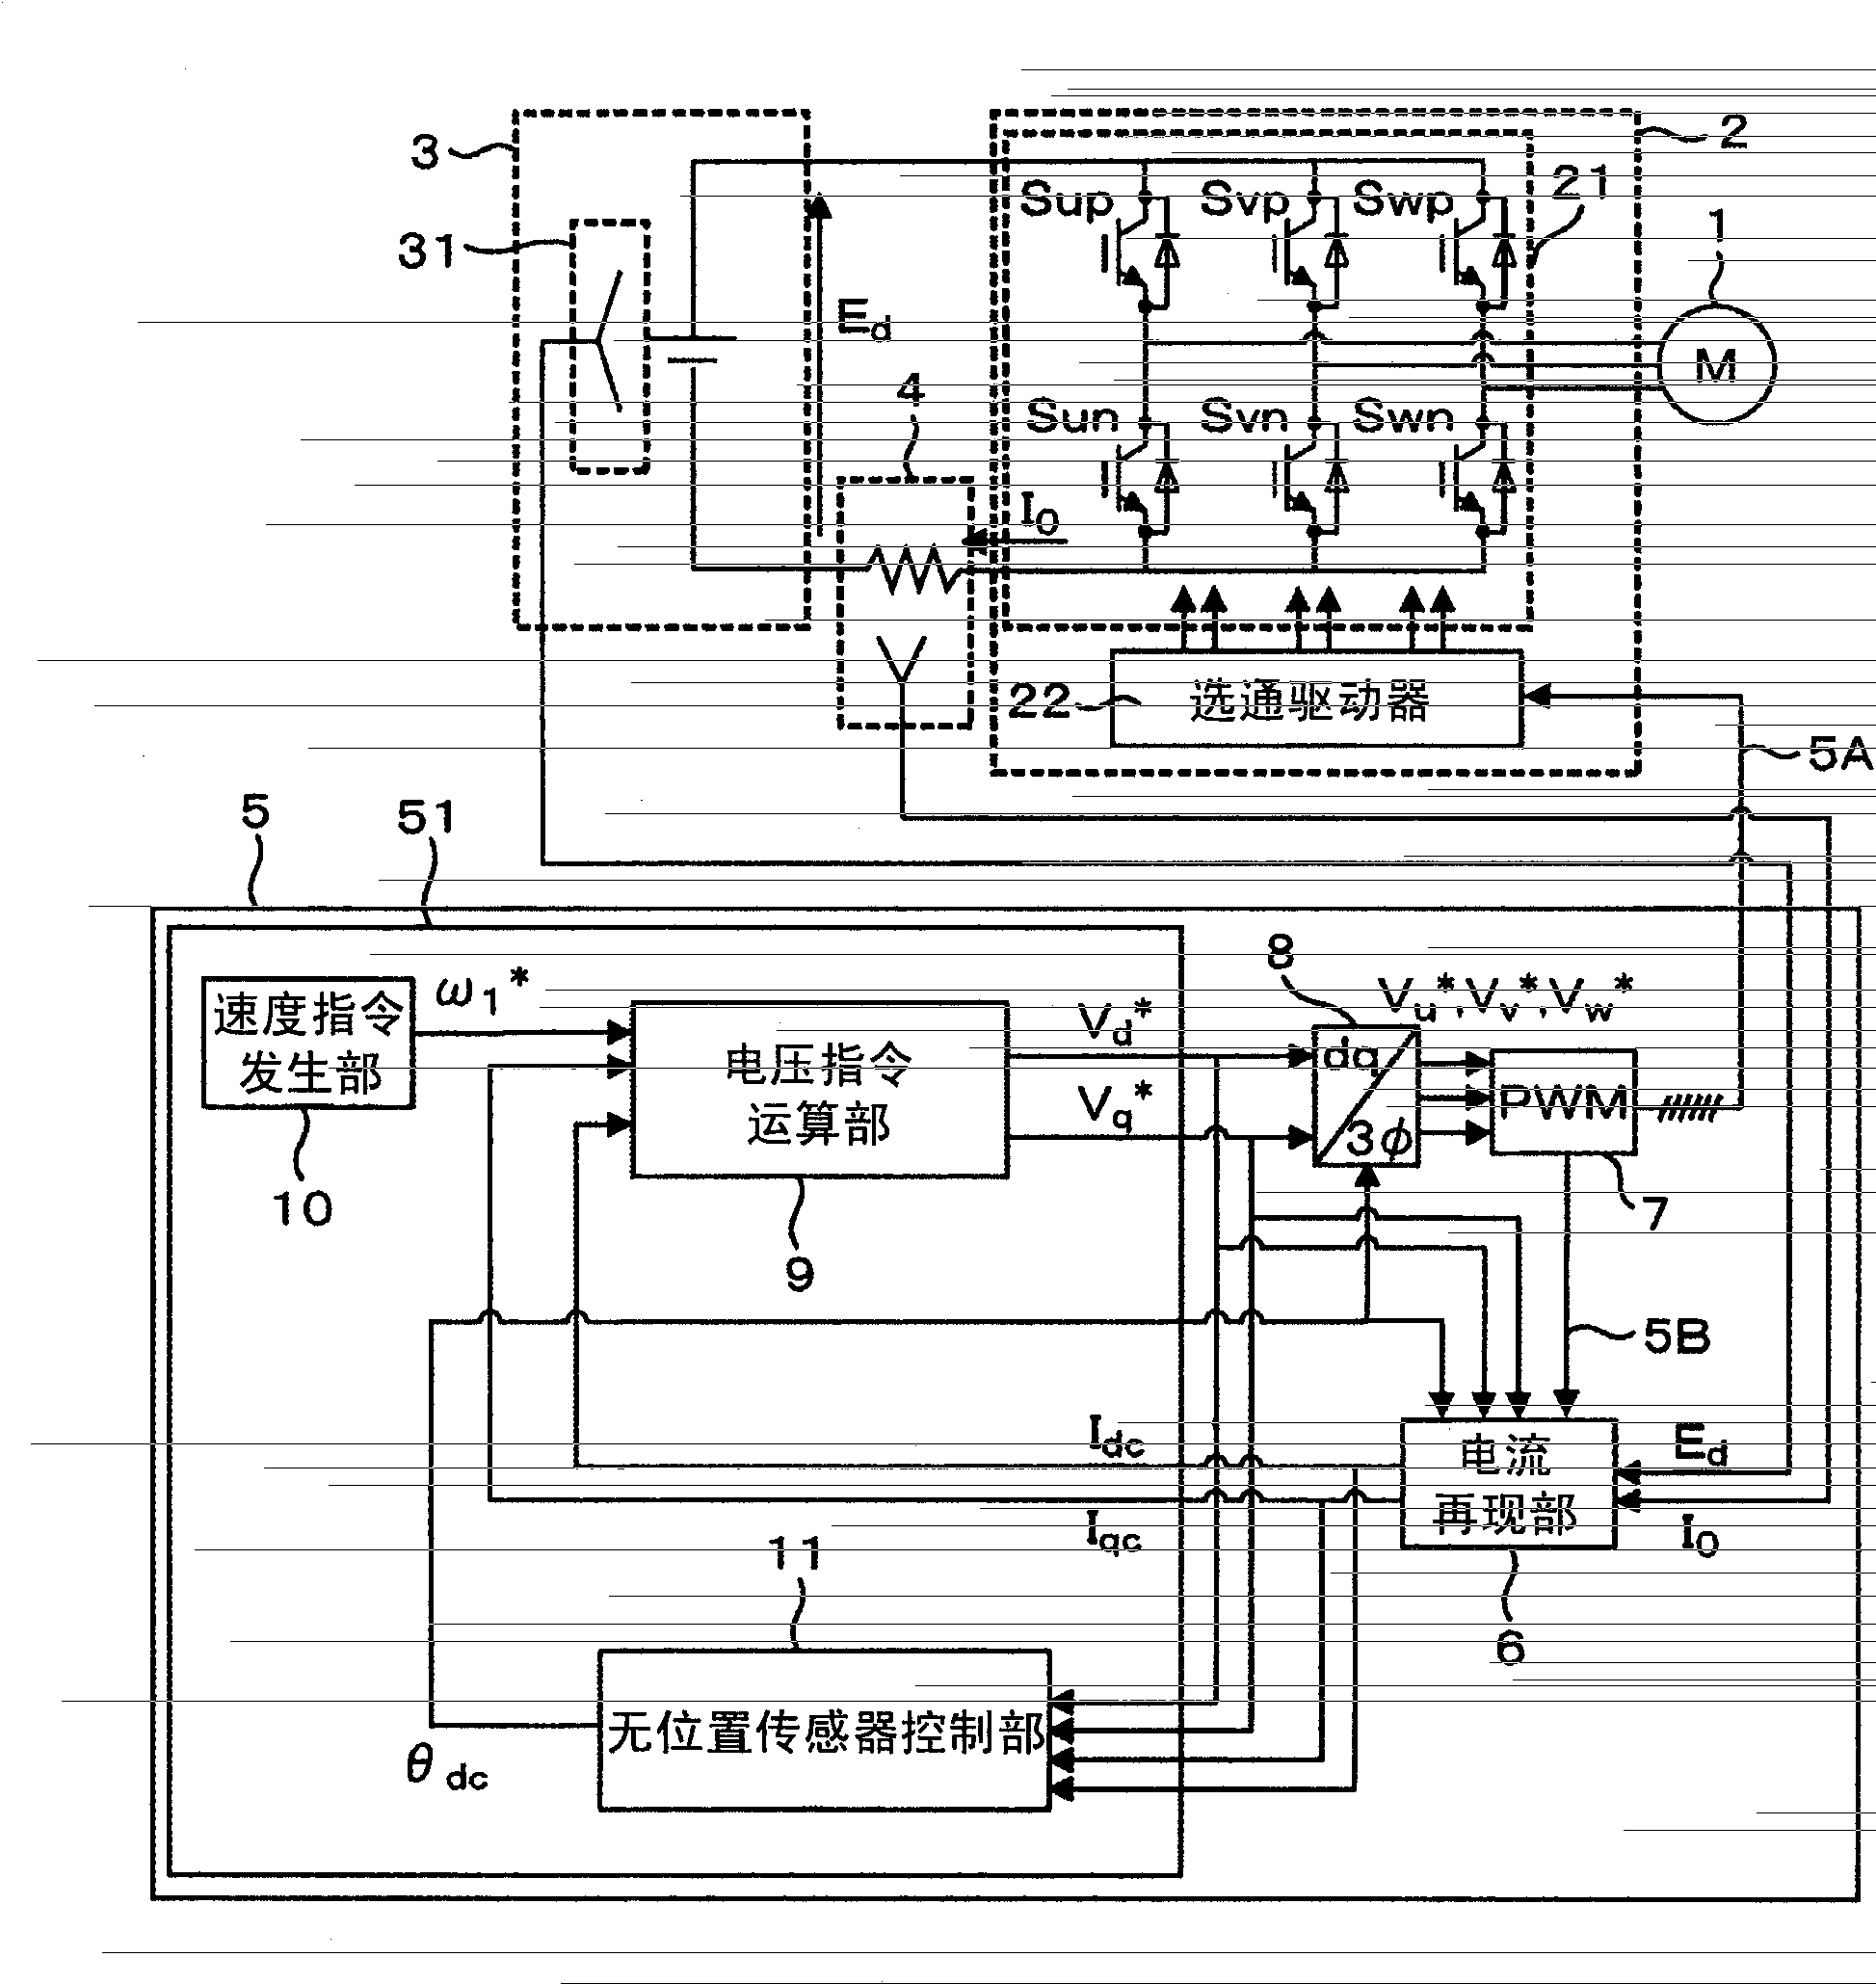 Inverter controlling apparatus, and air conditioner and washer using the same